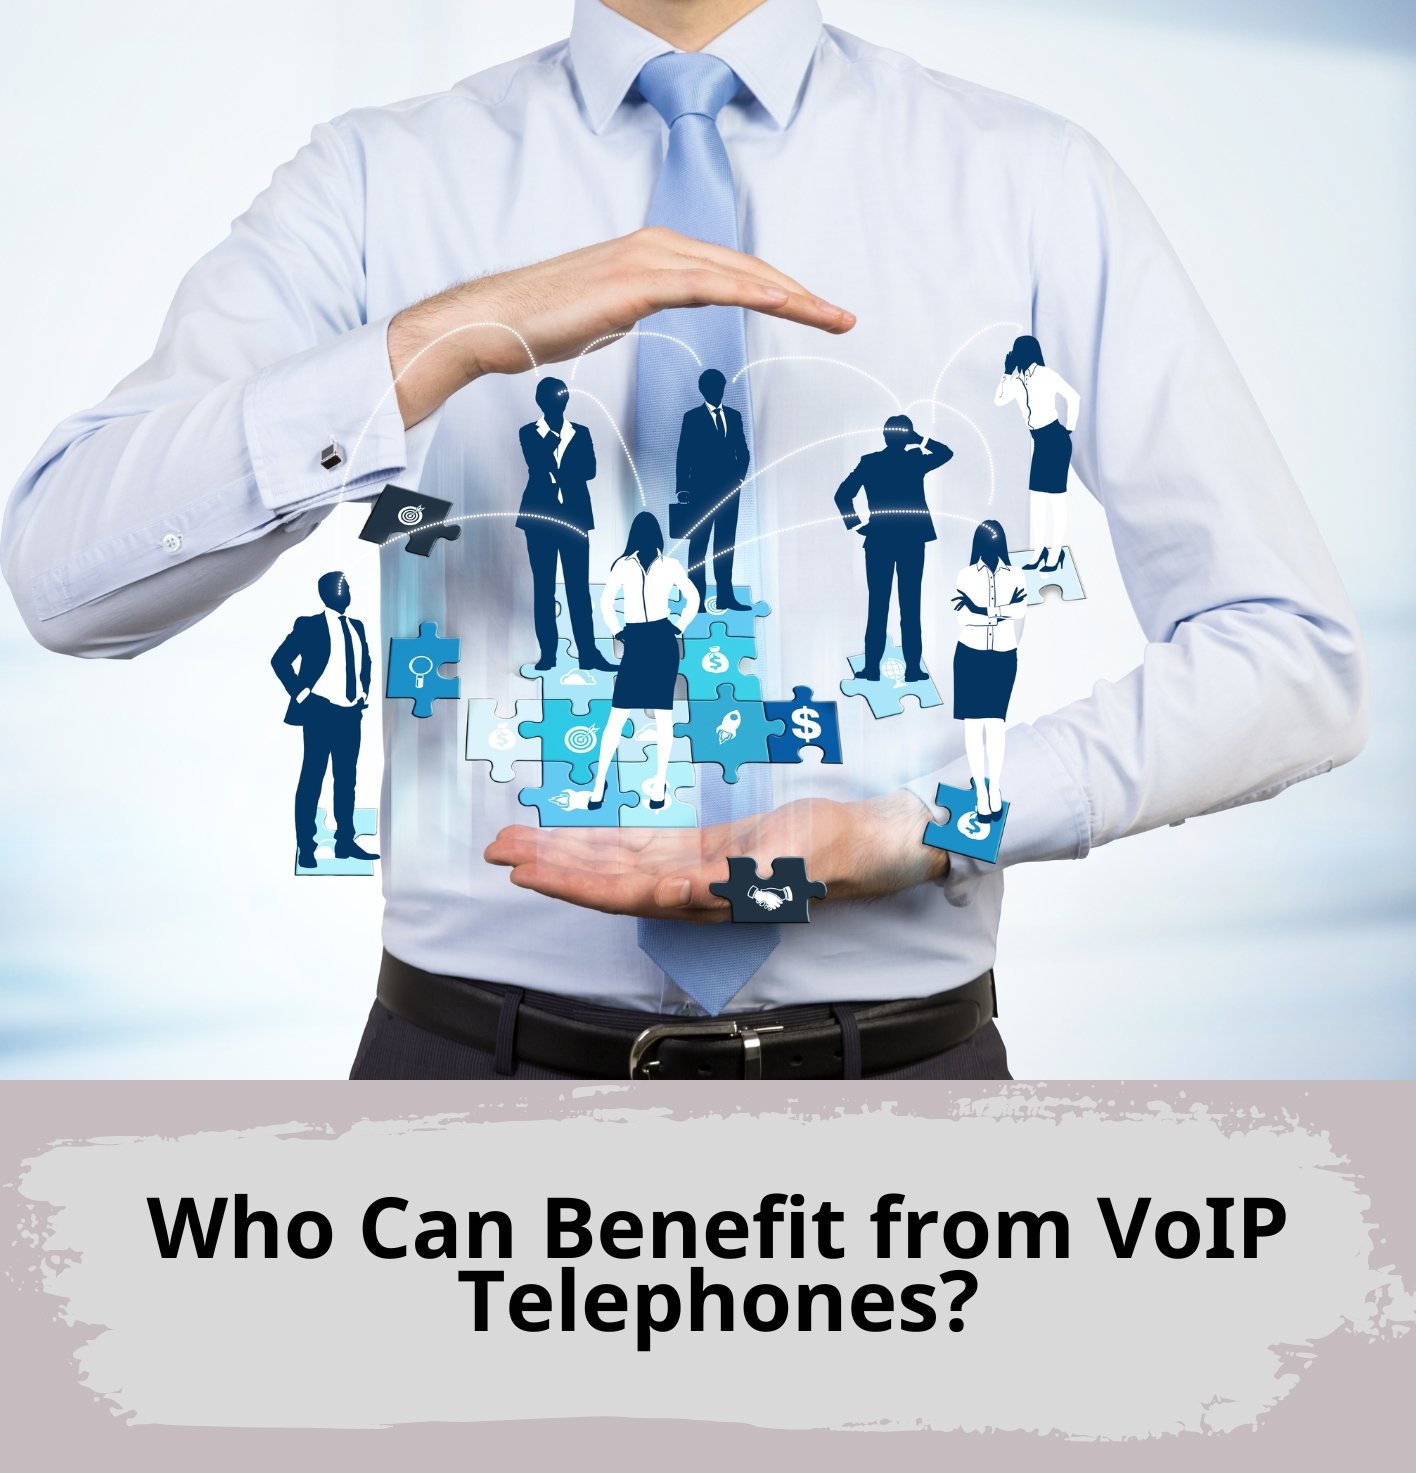 Who Can Benefit from VoIP Telephones?